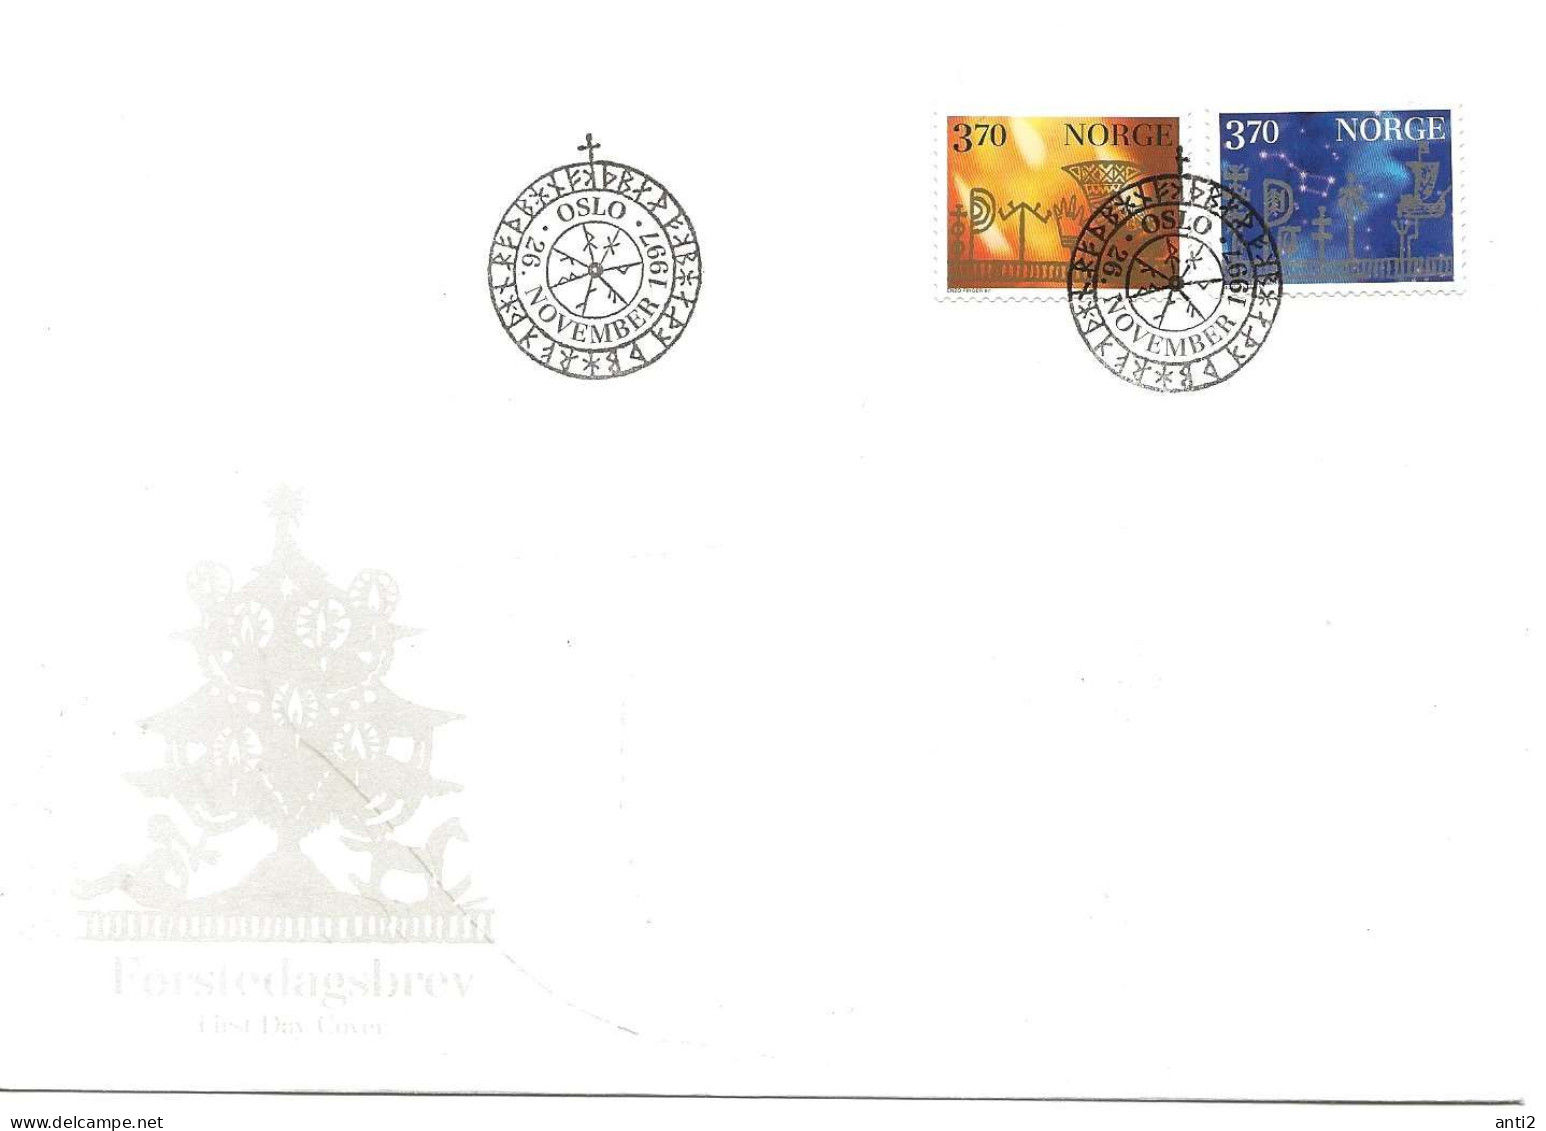 Norway Norge 1997  Christmas: Medieval Calendar Bars  1265 - 1266  FDC - Storia Postale